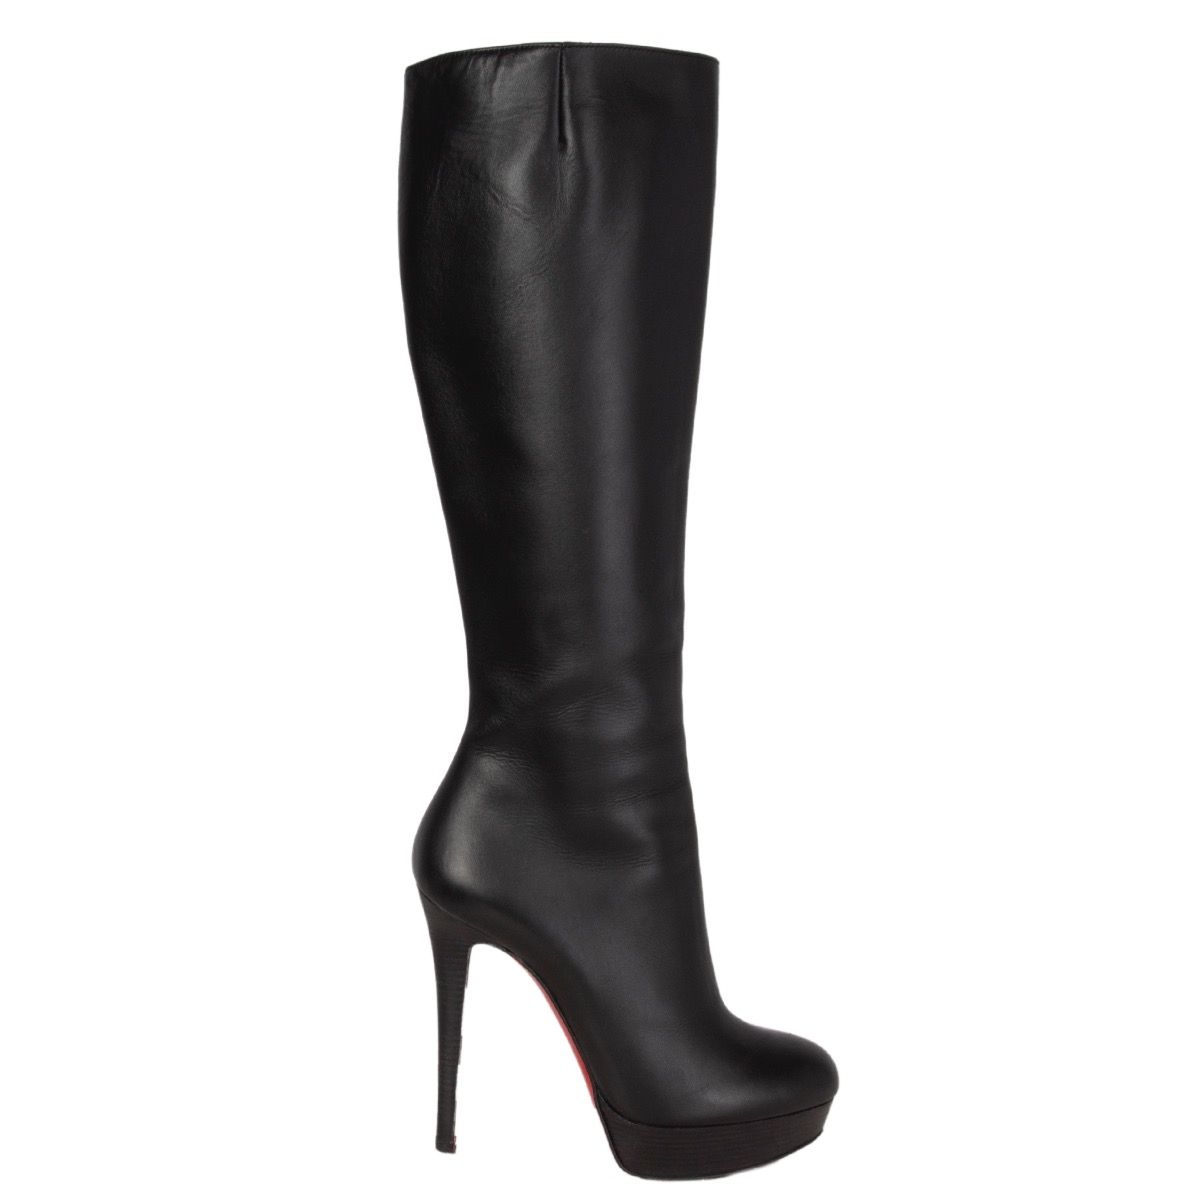 christain louboutin boots